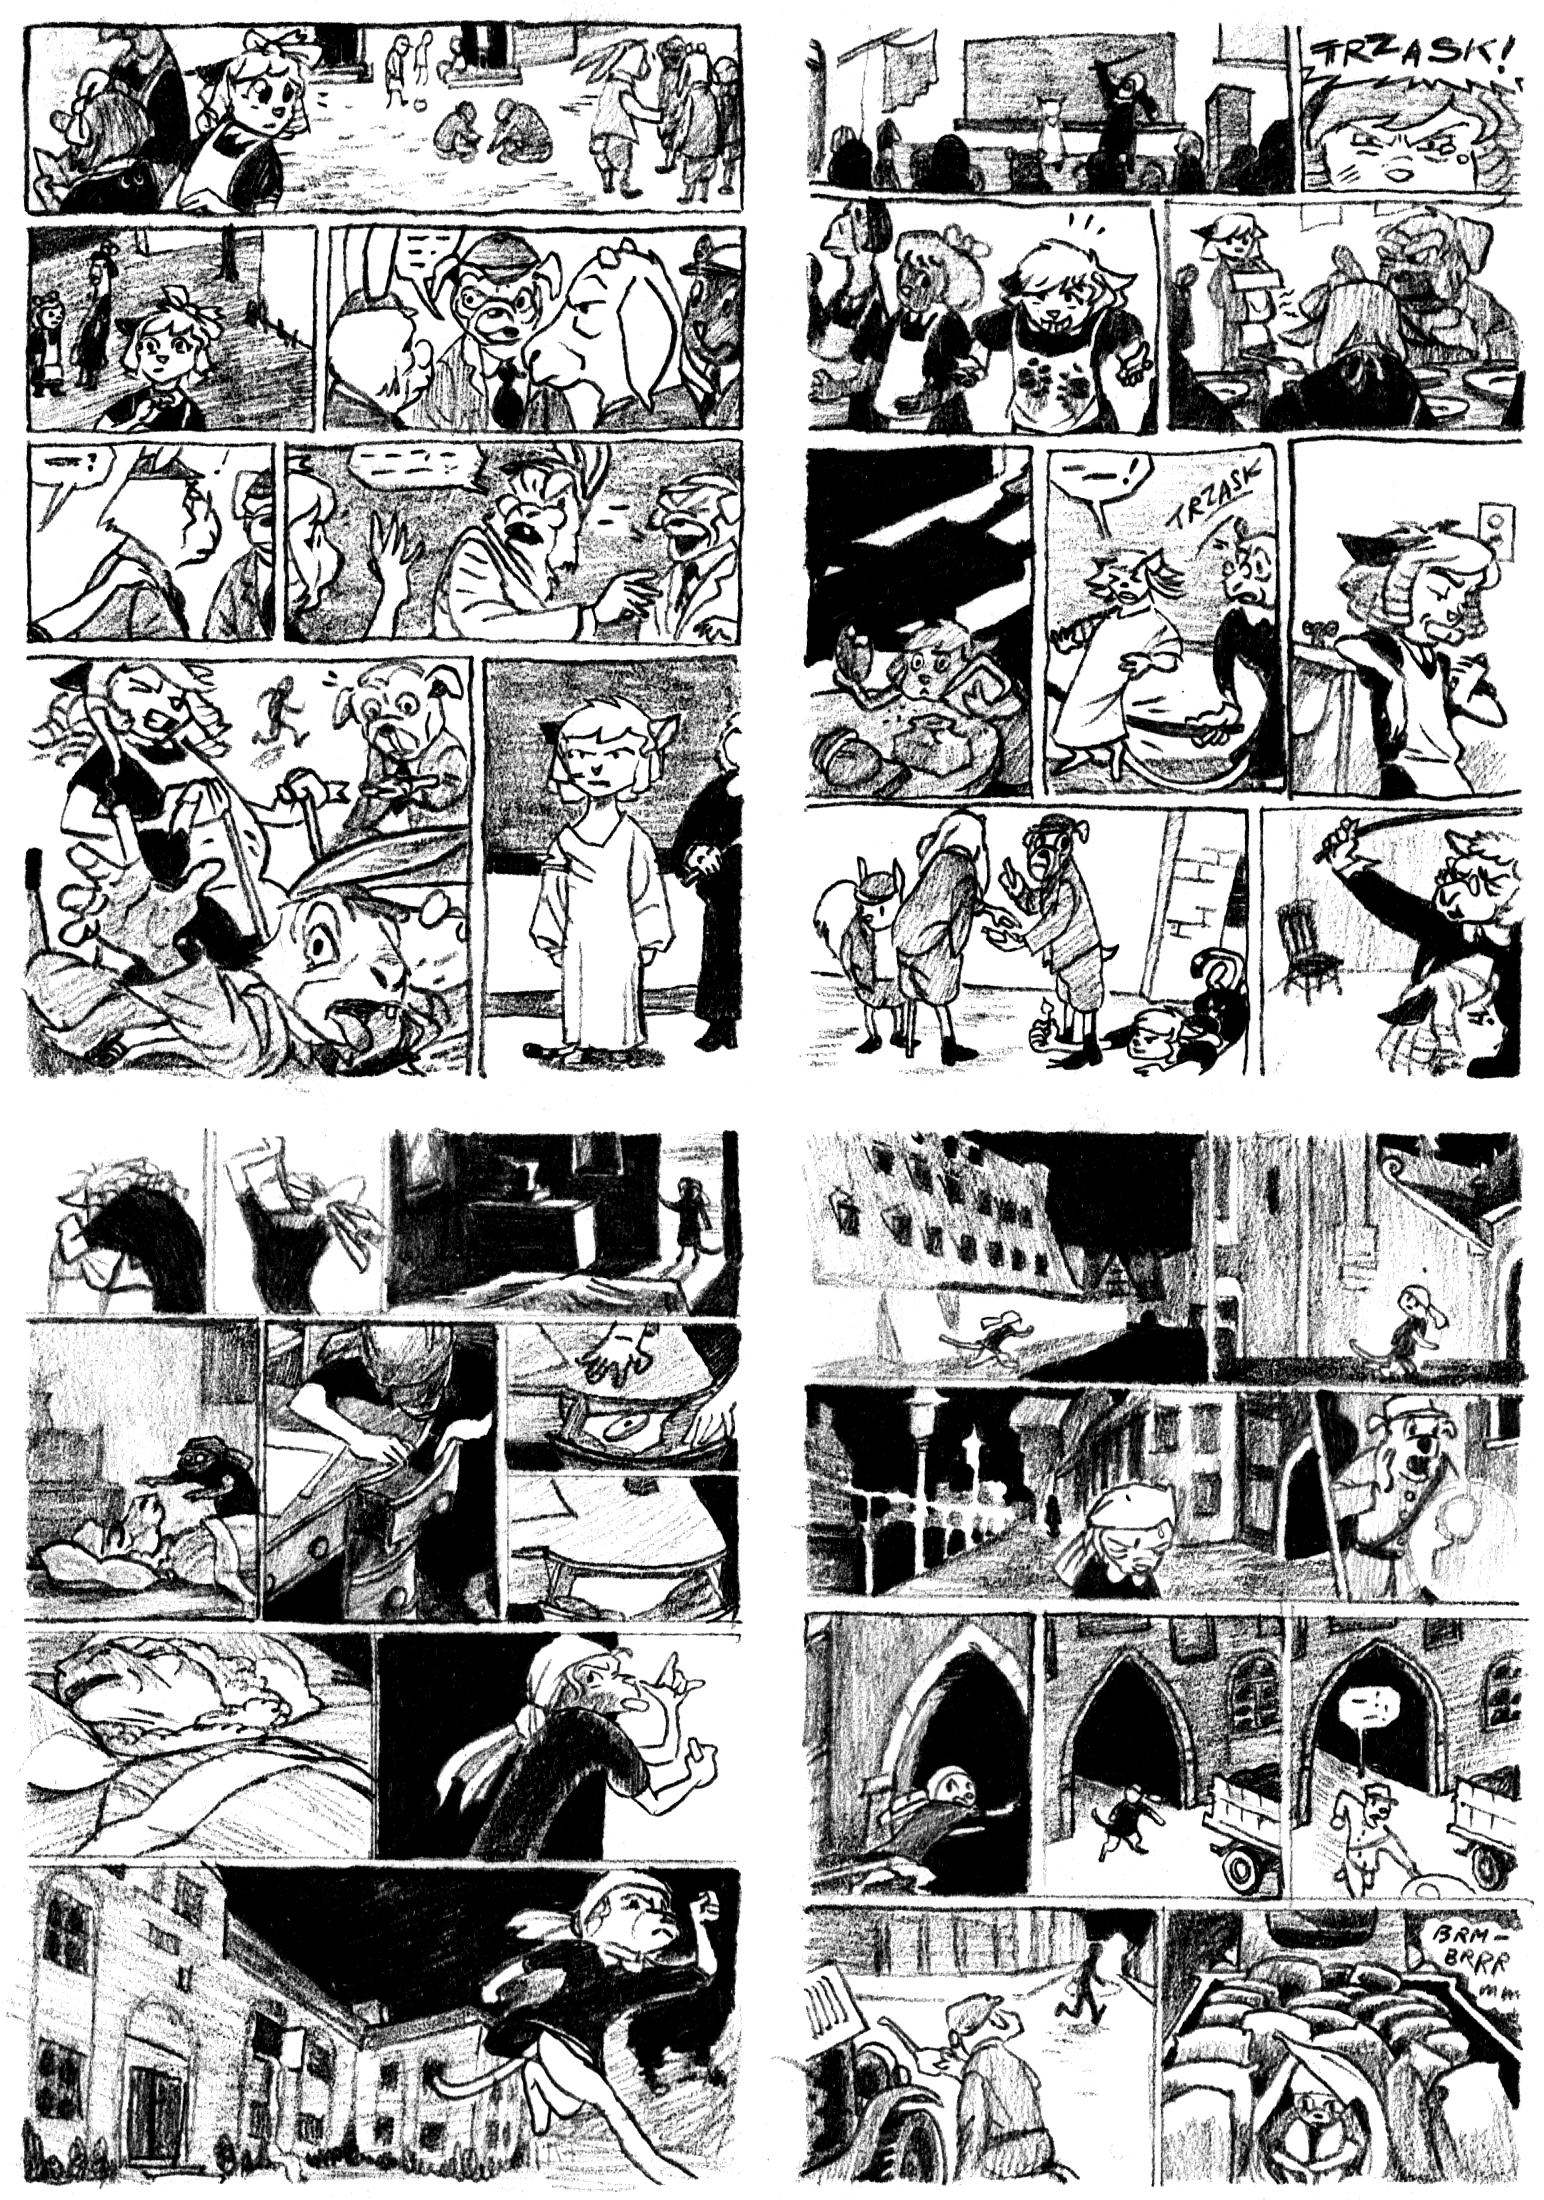 layouts for pages 22-25